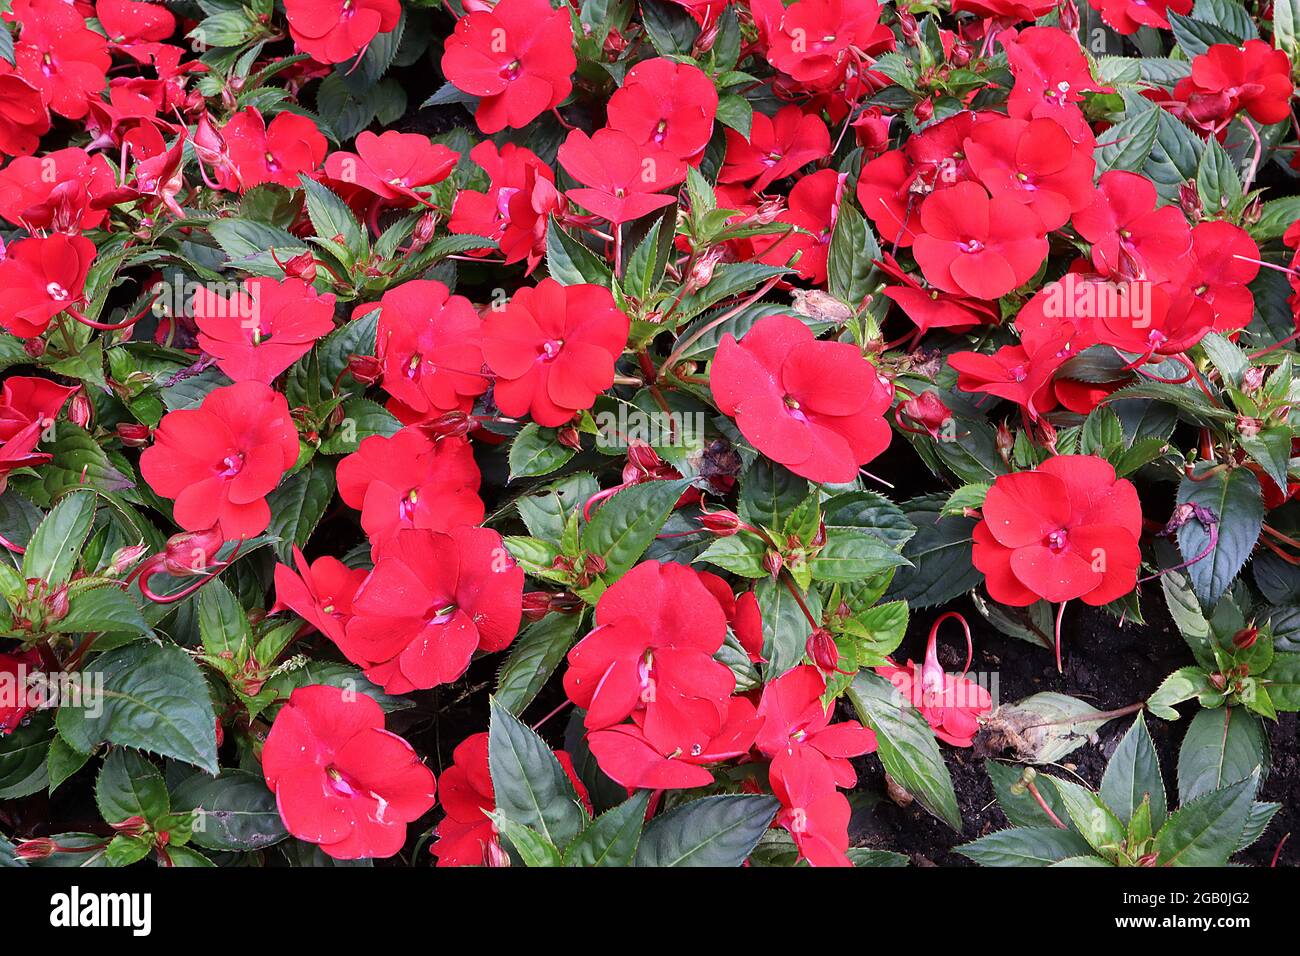 Impatiens hawkerii ‘Super Sonic Red’ New Guinea Impatiens Red - flat red flowers and dark green serrated leaves, June, England, UK Foto Stock